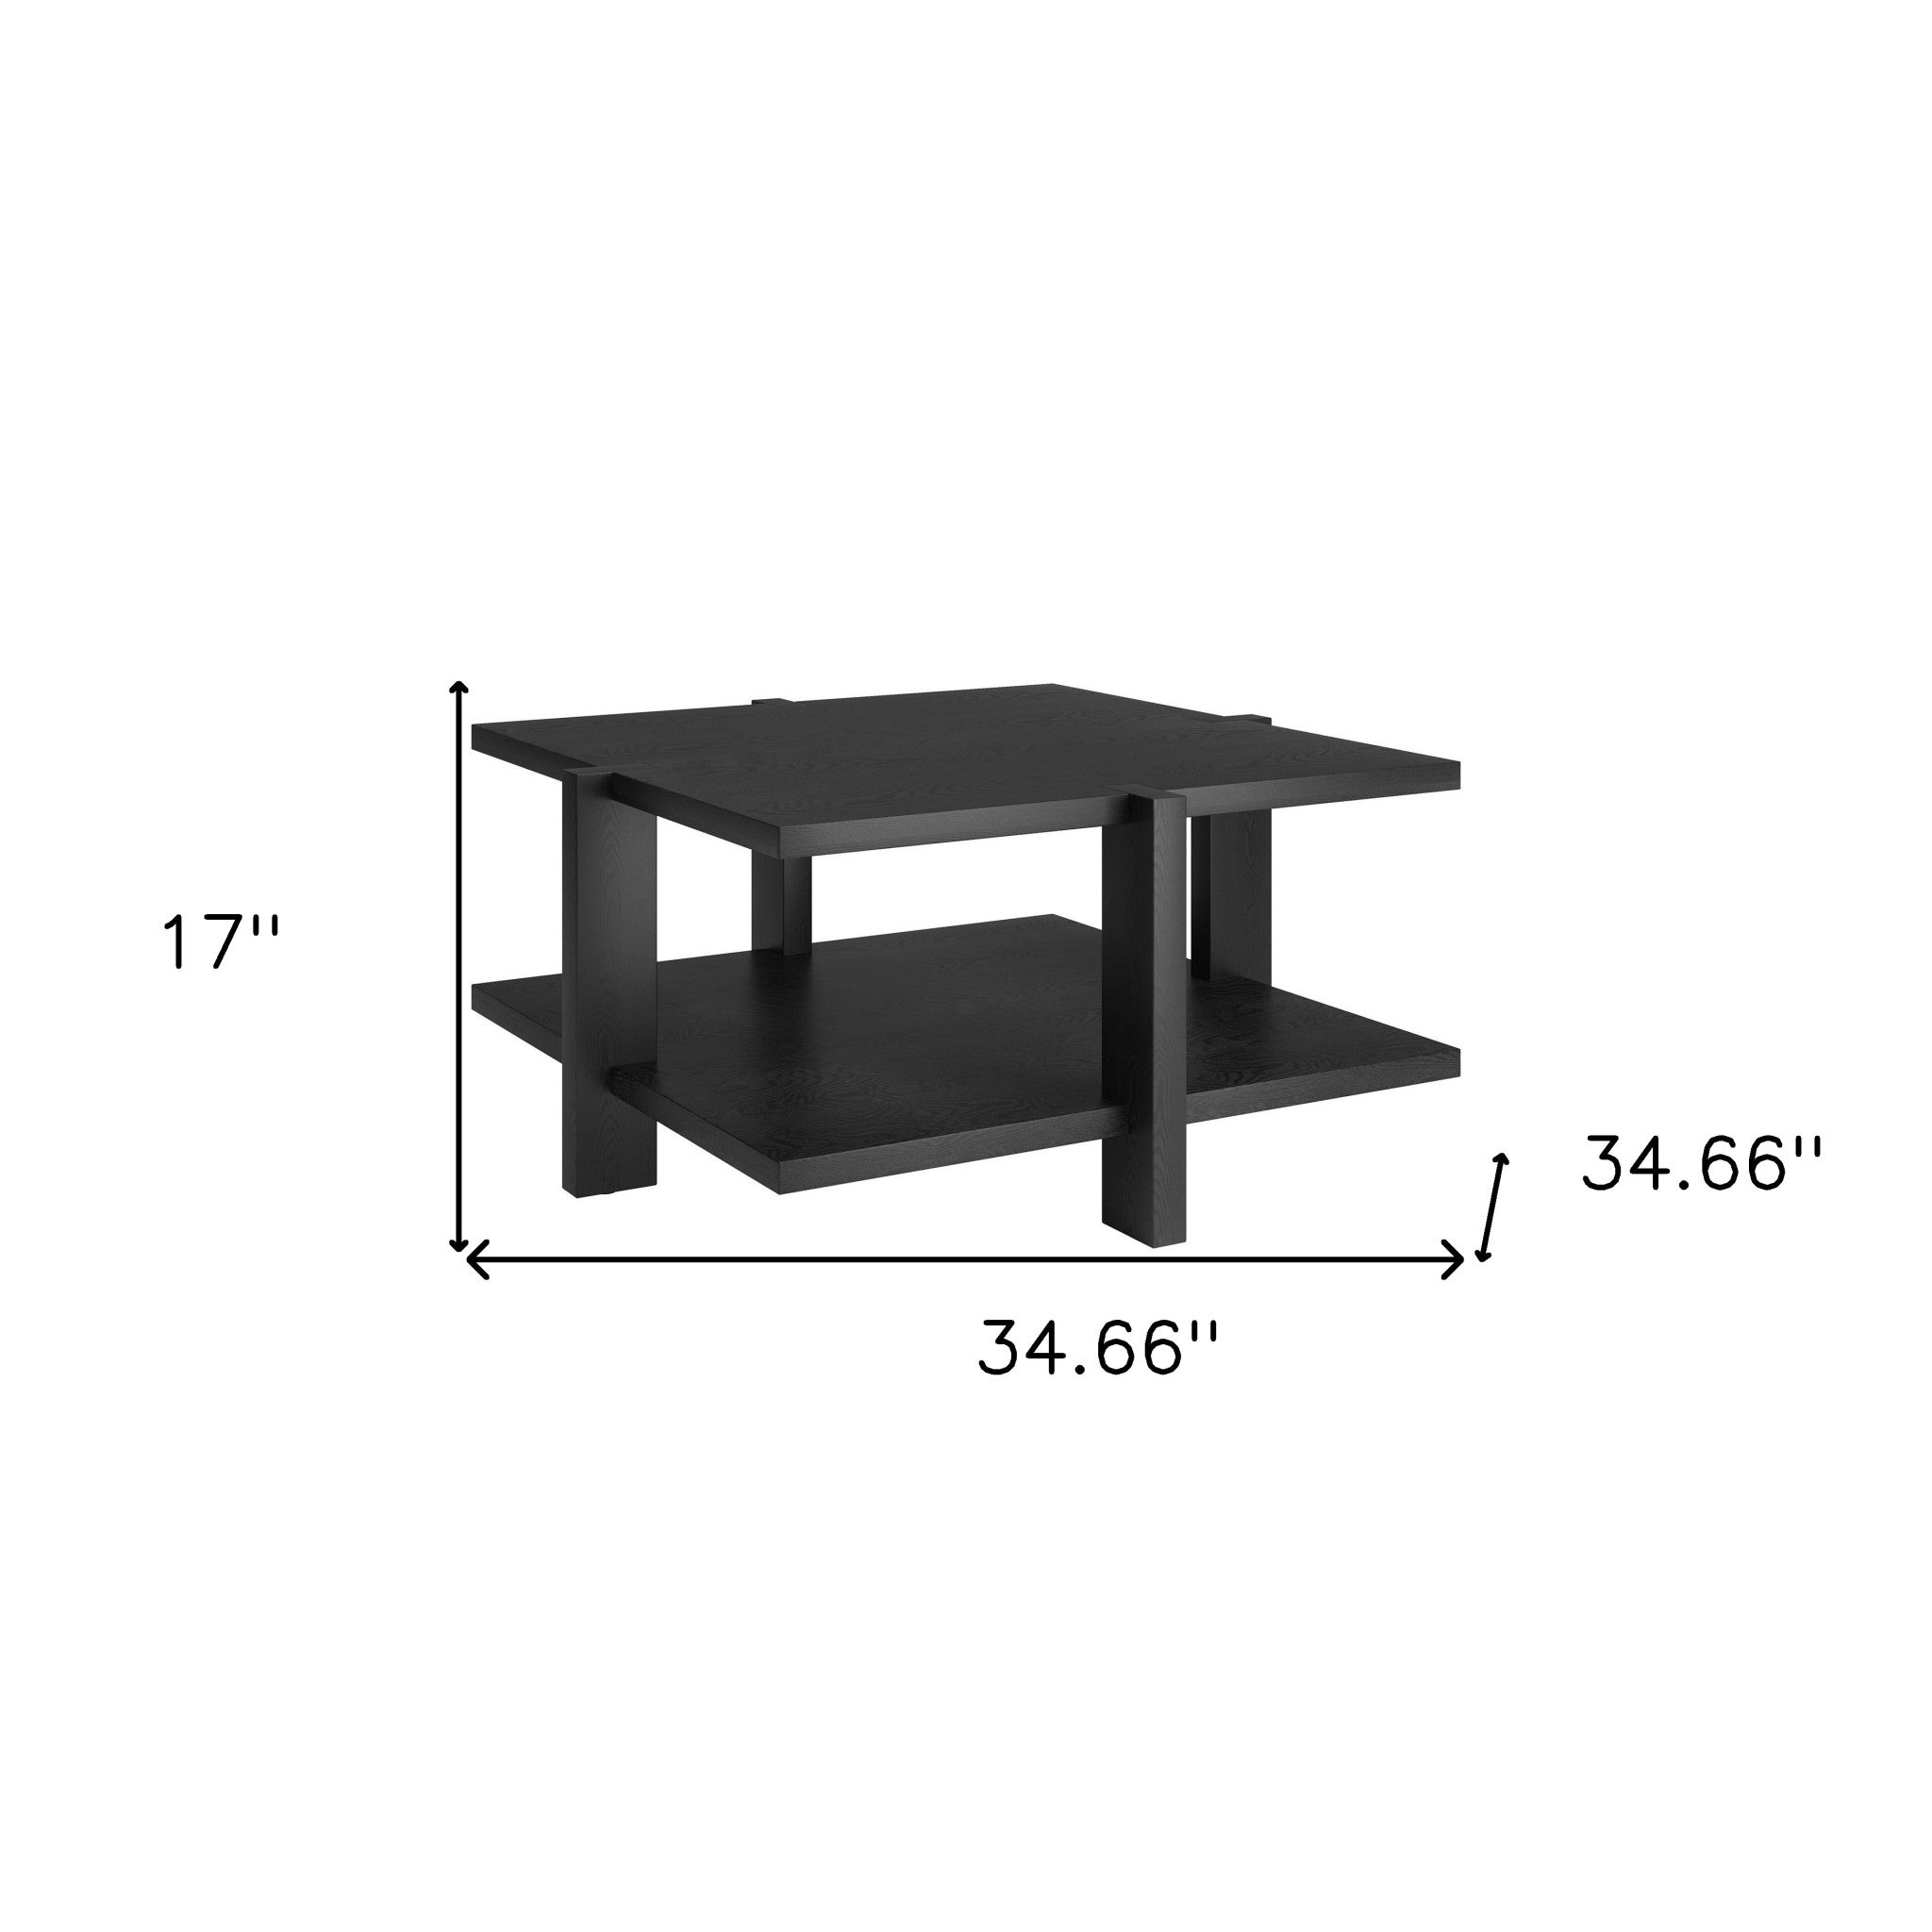 35" Black Square Coffee Table With Shelf